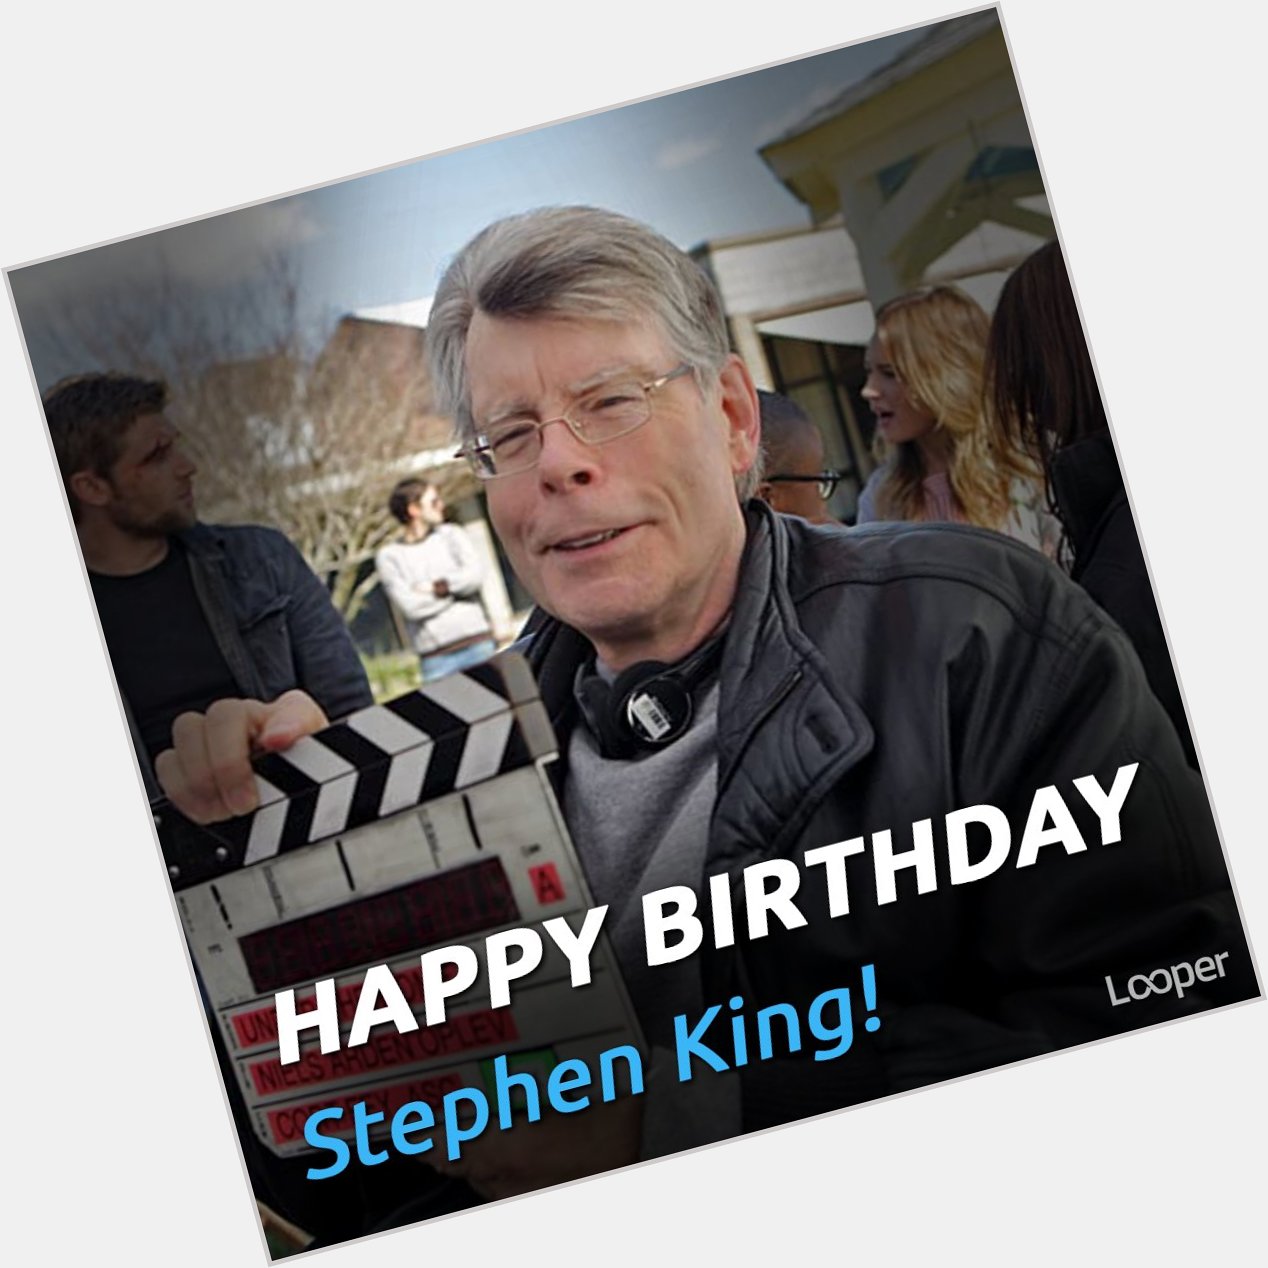 Happy Birthday Stephen King!

What is your favorite movie? 